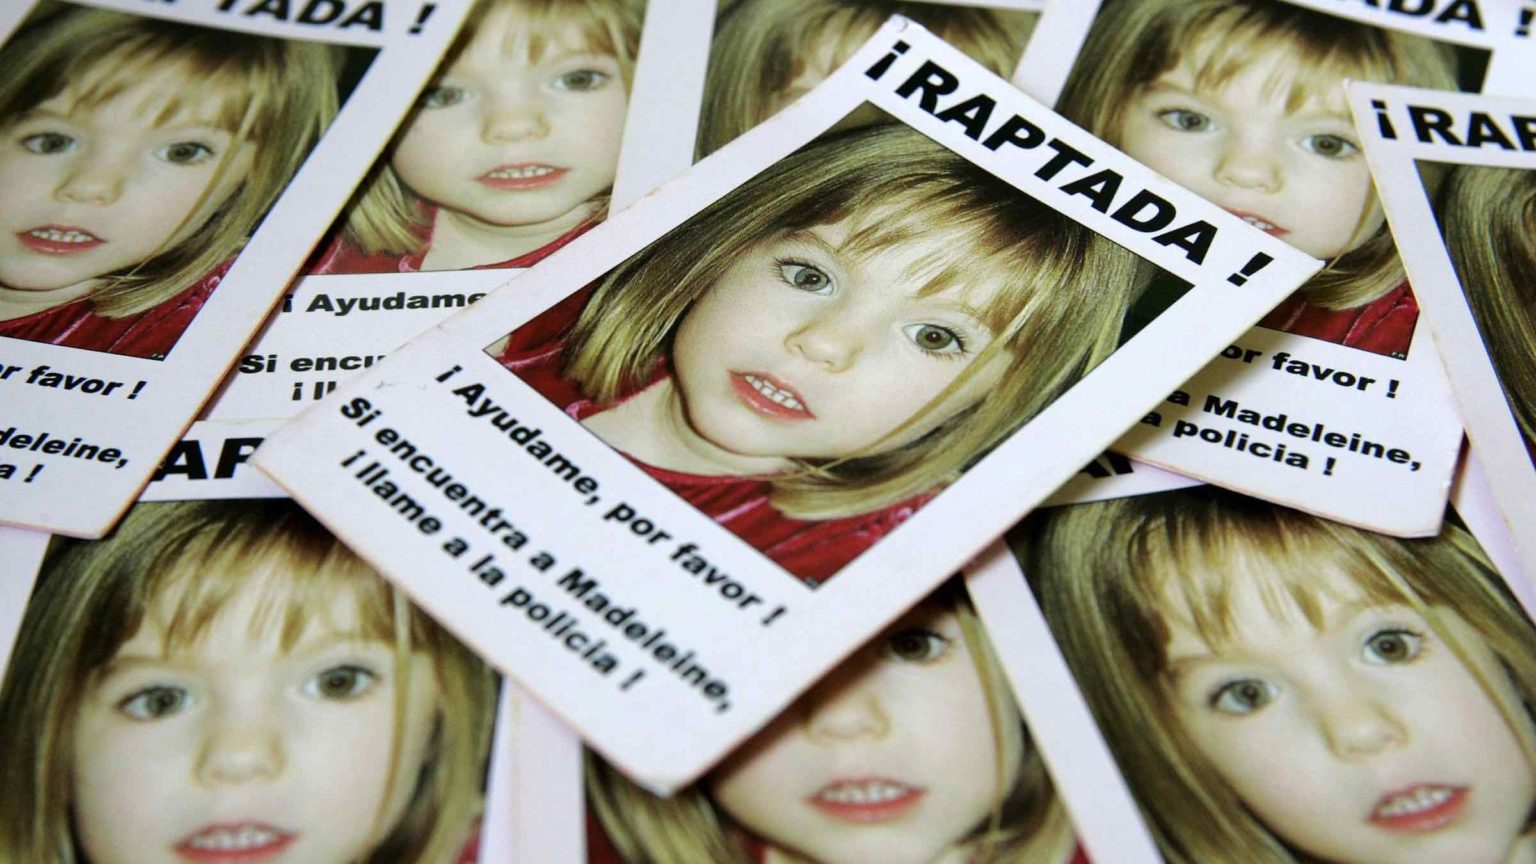 Netflix has given us some great true crime documentaries, but 'The Disappearance of Madeleine McCann' is not one of them. Here's what we know.